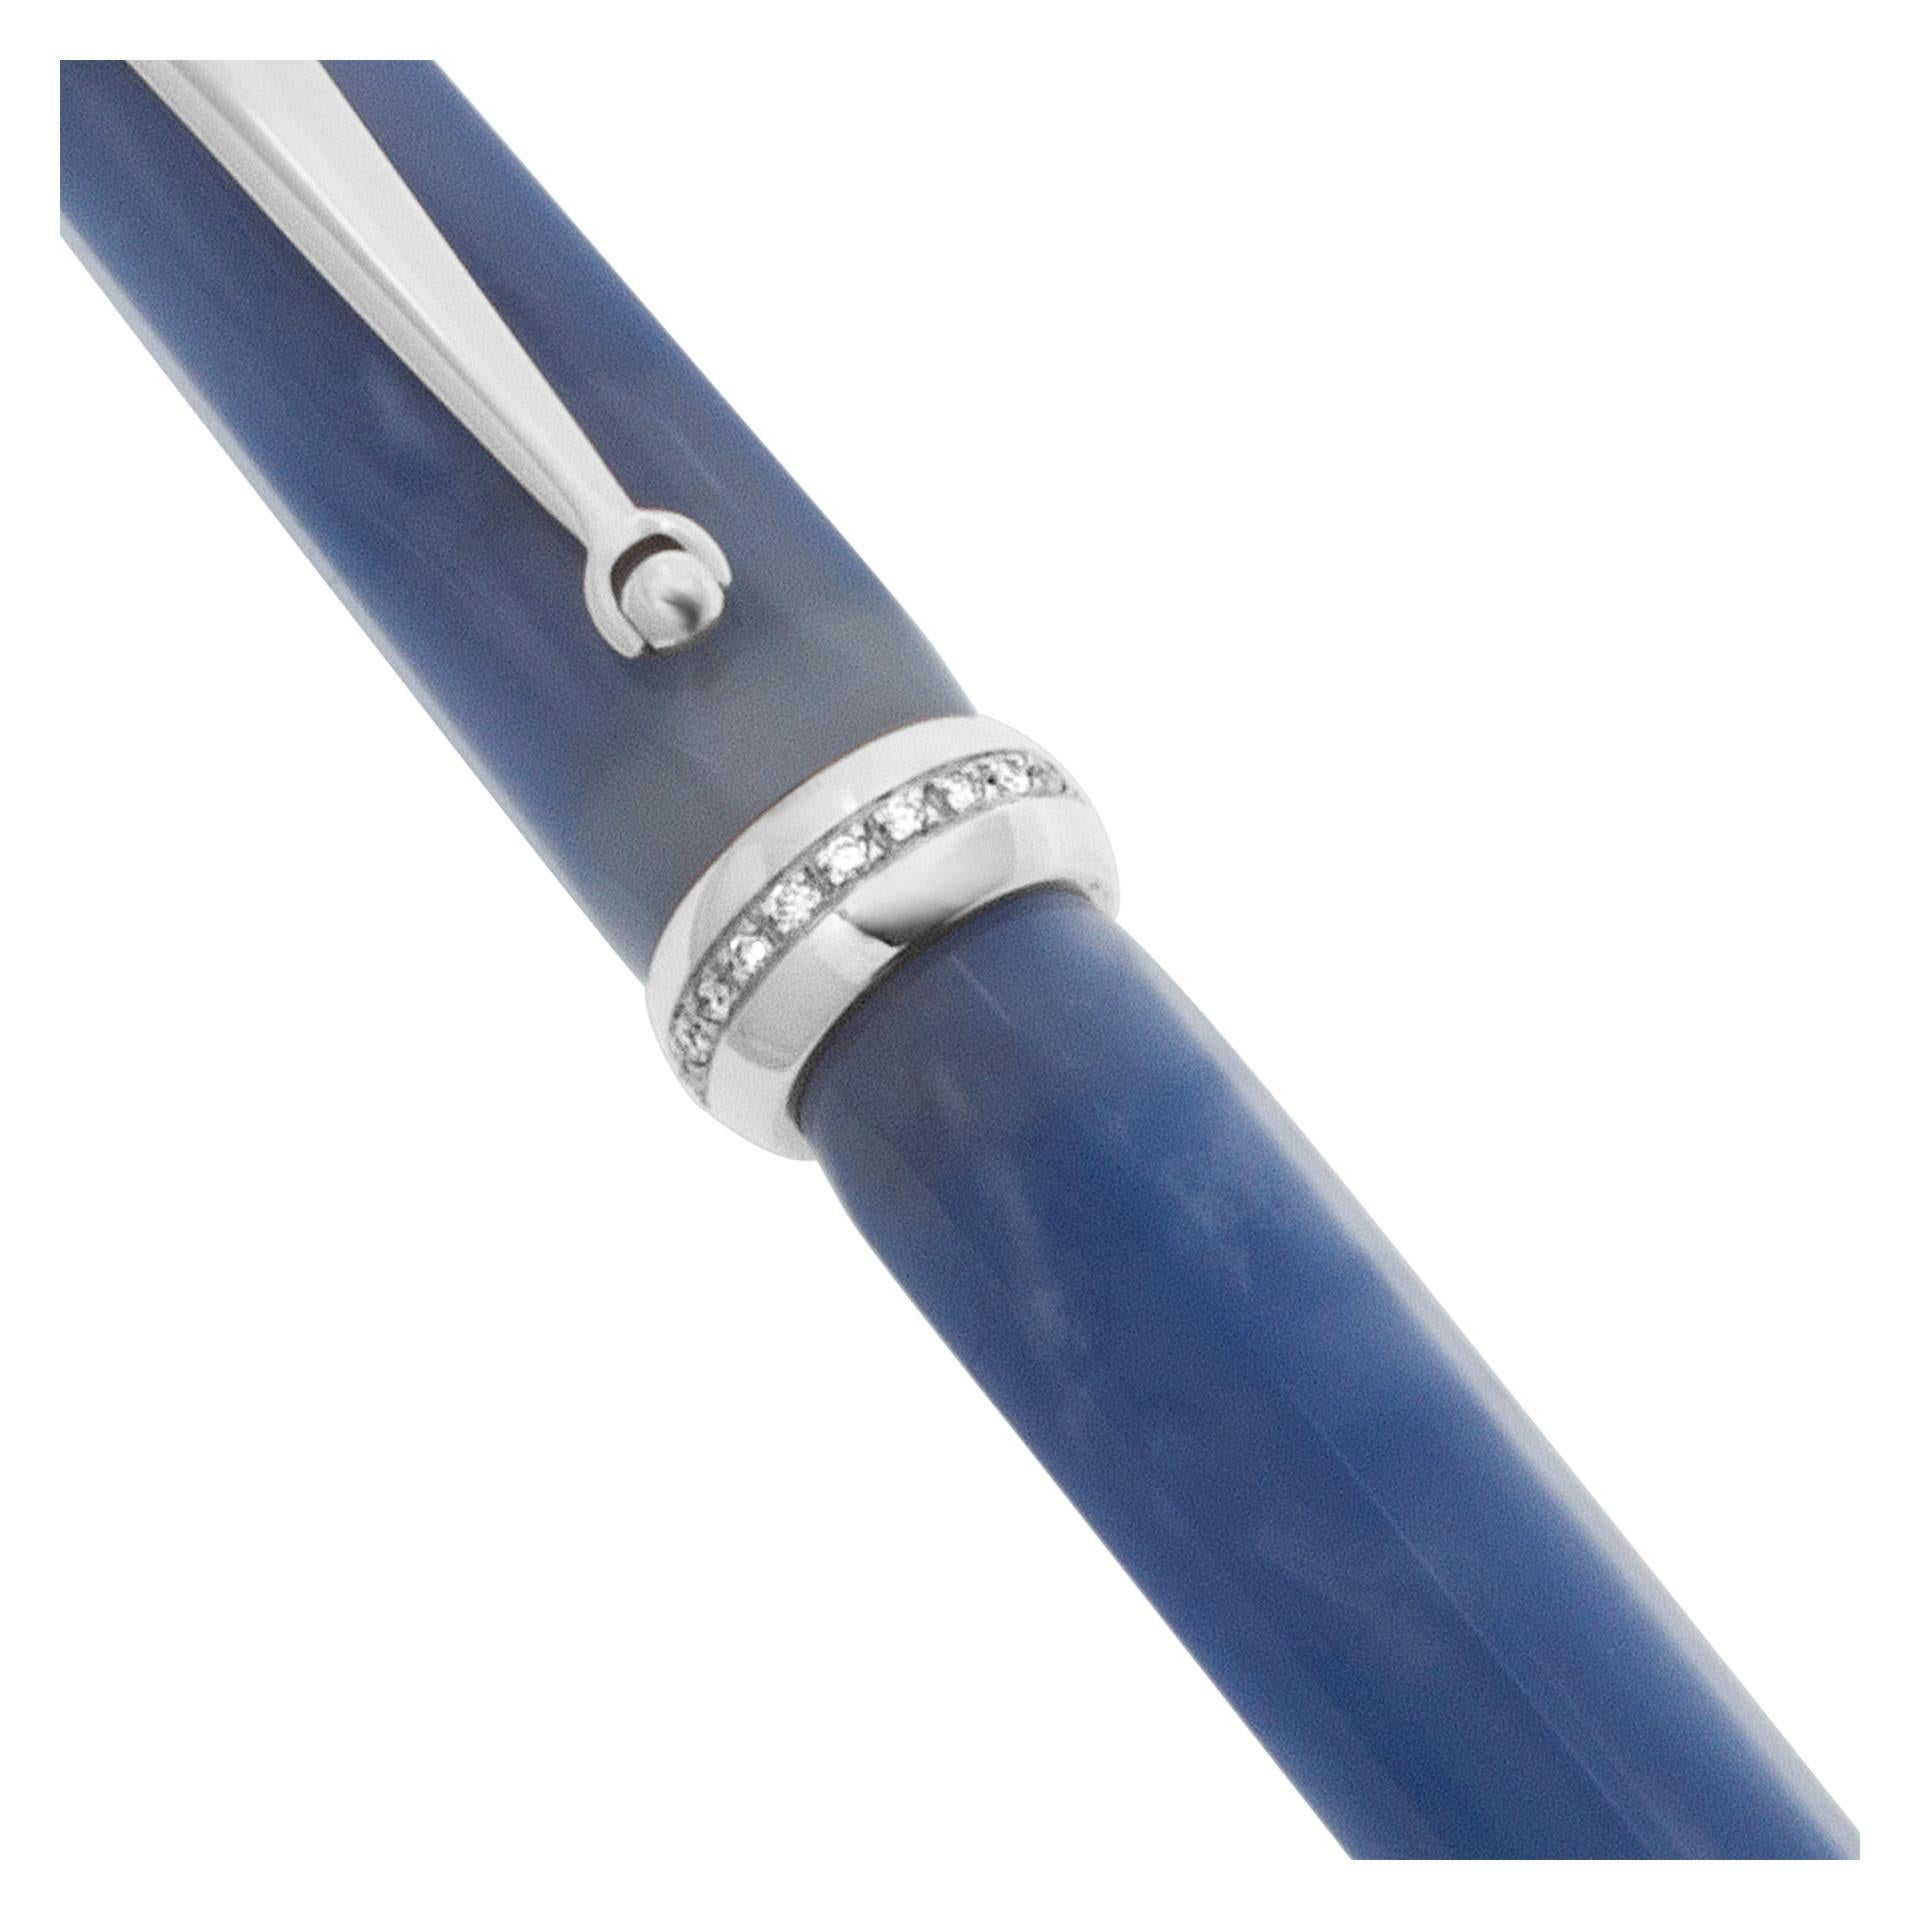 Montegrappa micra diamond fountain pen, octagonal pearlized in clear blue resin with sterling silver trim and medium 18K gold nib. Natural, brilliant cut diamonds. Count: 21, 0.27ct total weight. Clarity: VS2-SI1. Color: H. Length: 4.4in. Width: